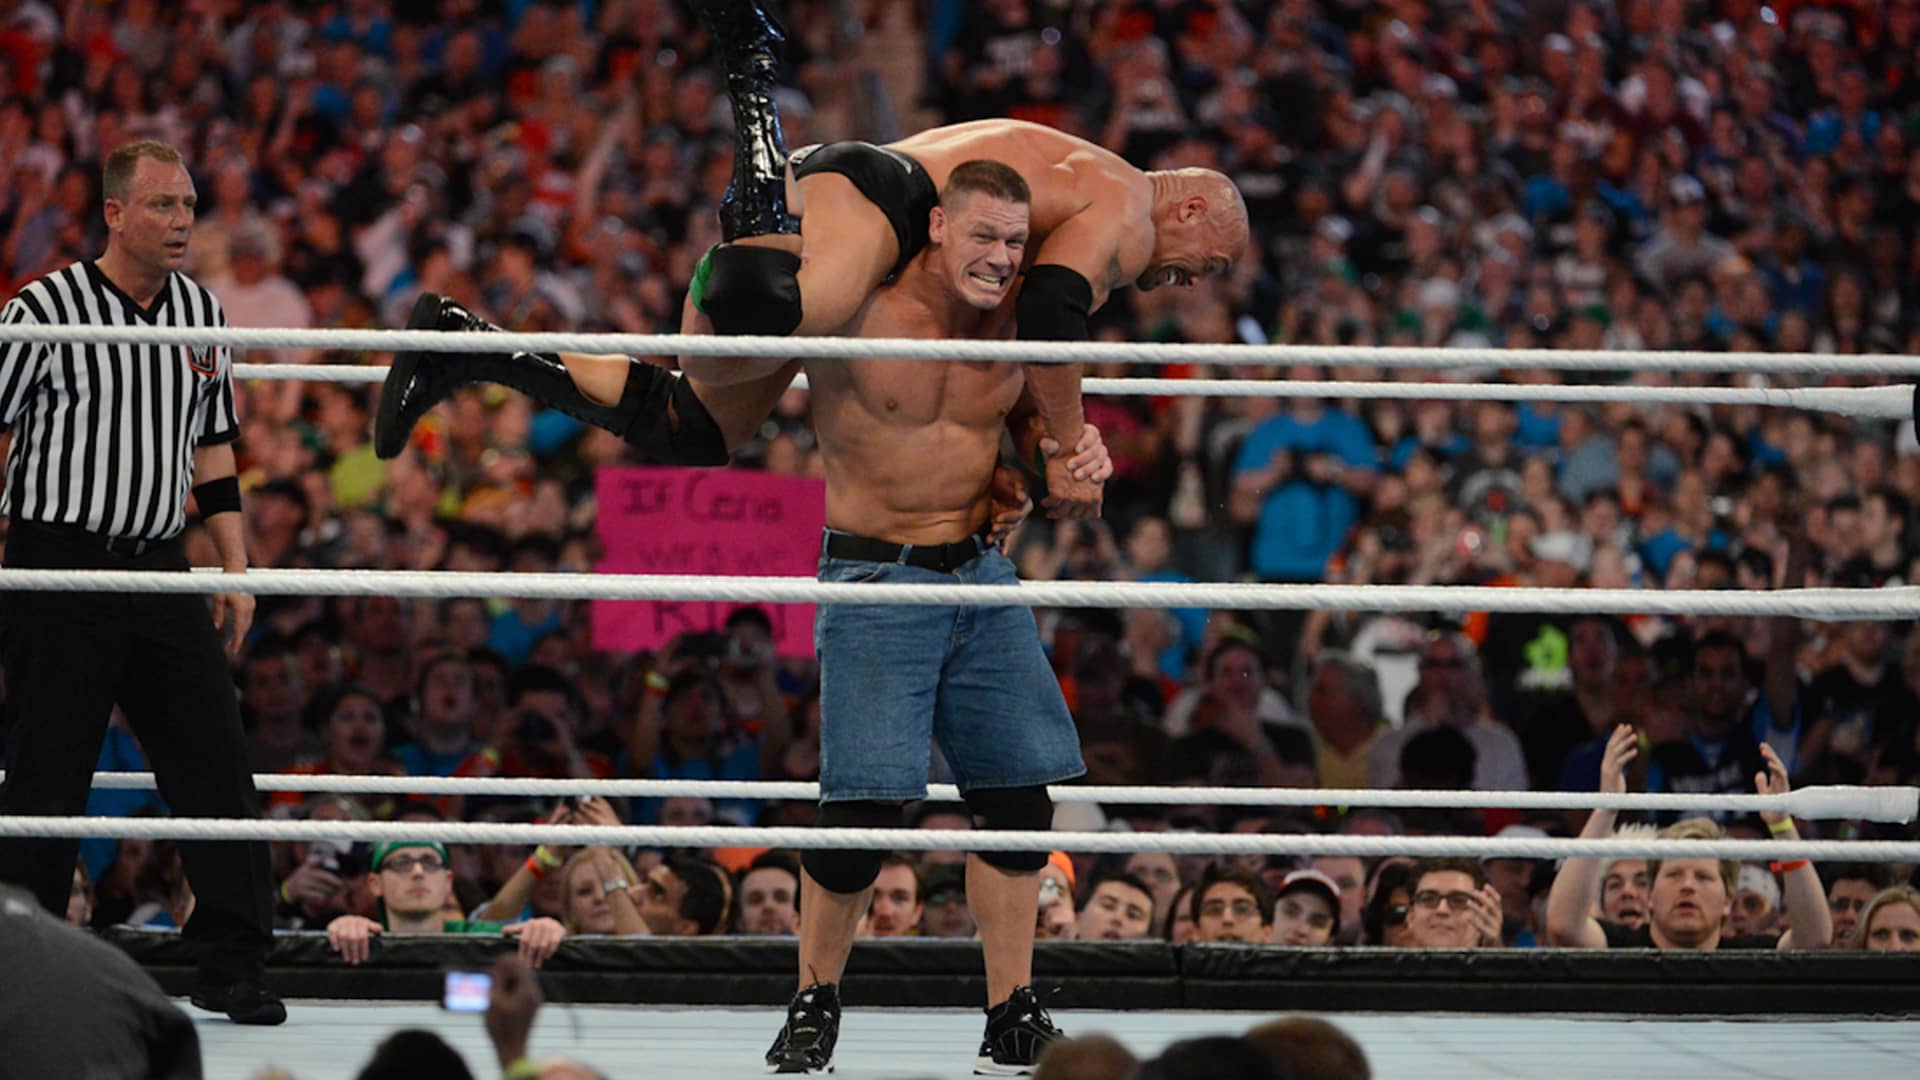 WWE Wrestlemania in the U.K.: John Cena pitches pitches London as venue